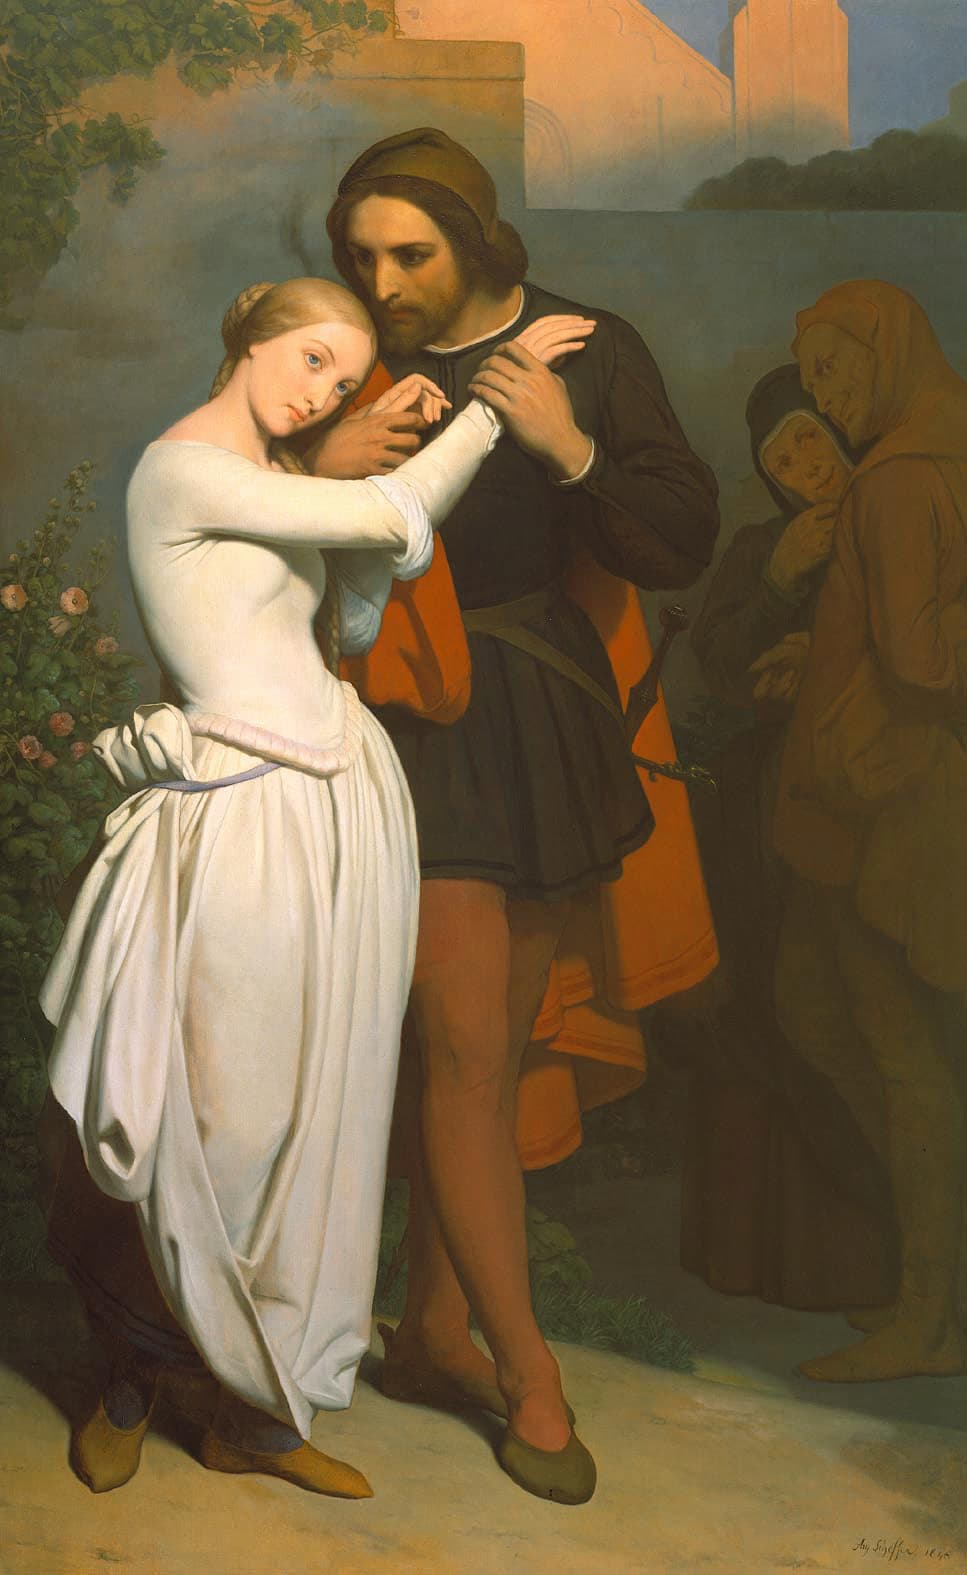 Ary Scheffer: Faust and Gretchen in the Garden, 1846